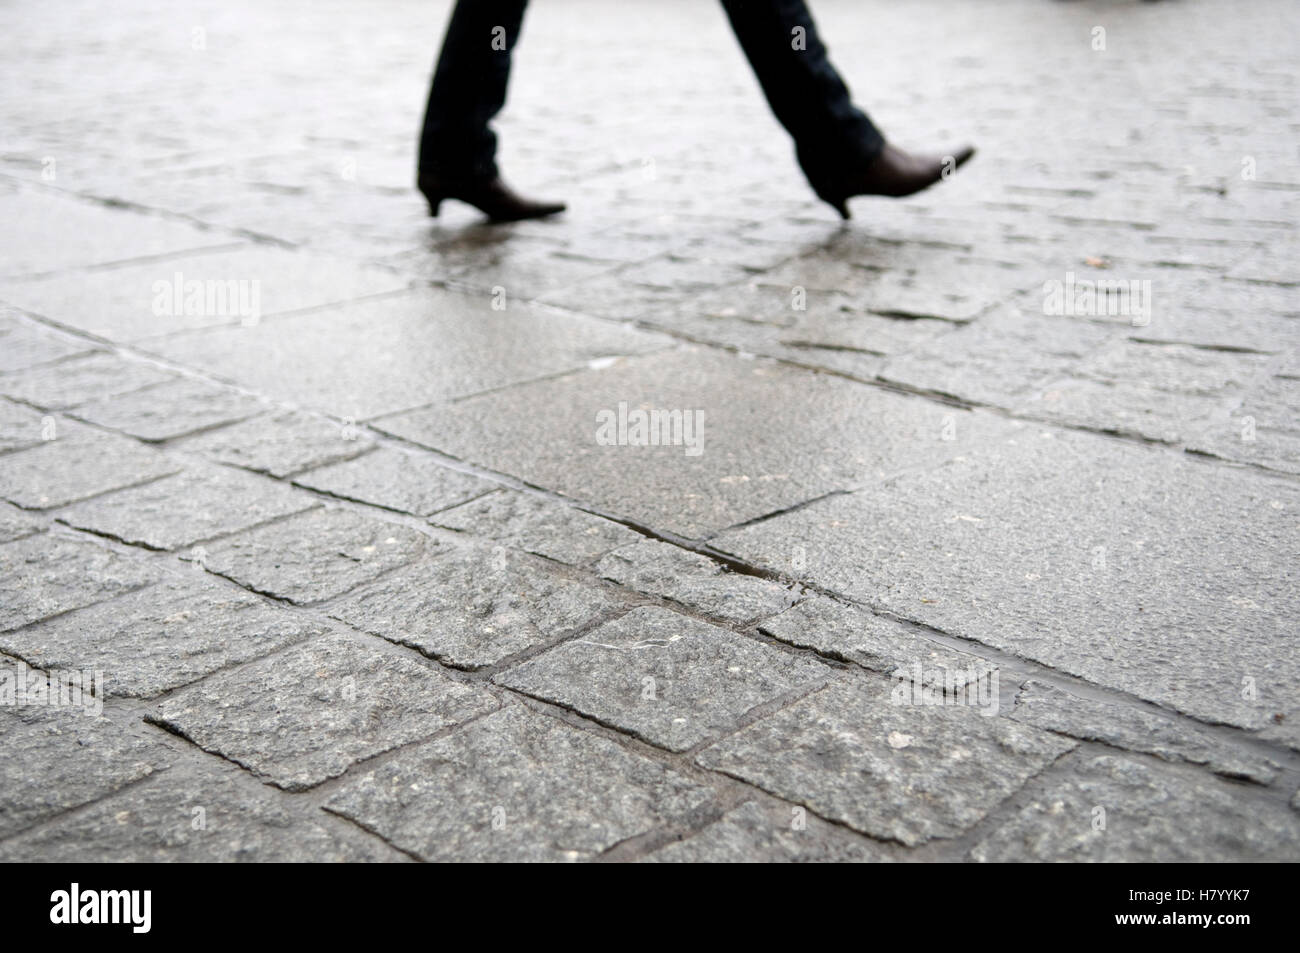 Feet with pointed shoes walking on wet pavement Stock Photo